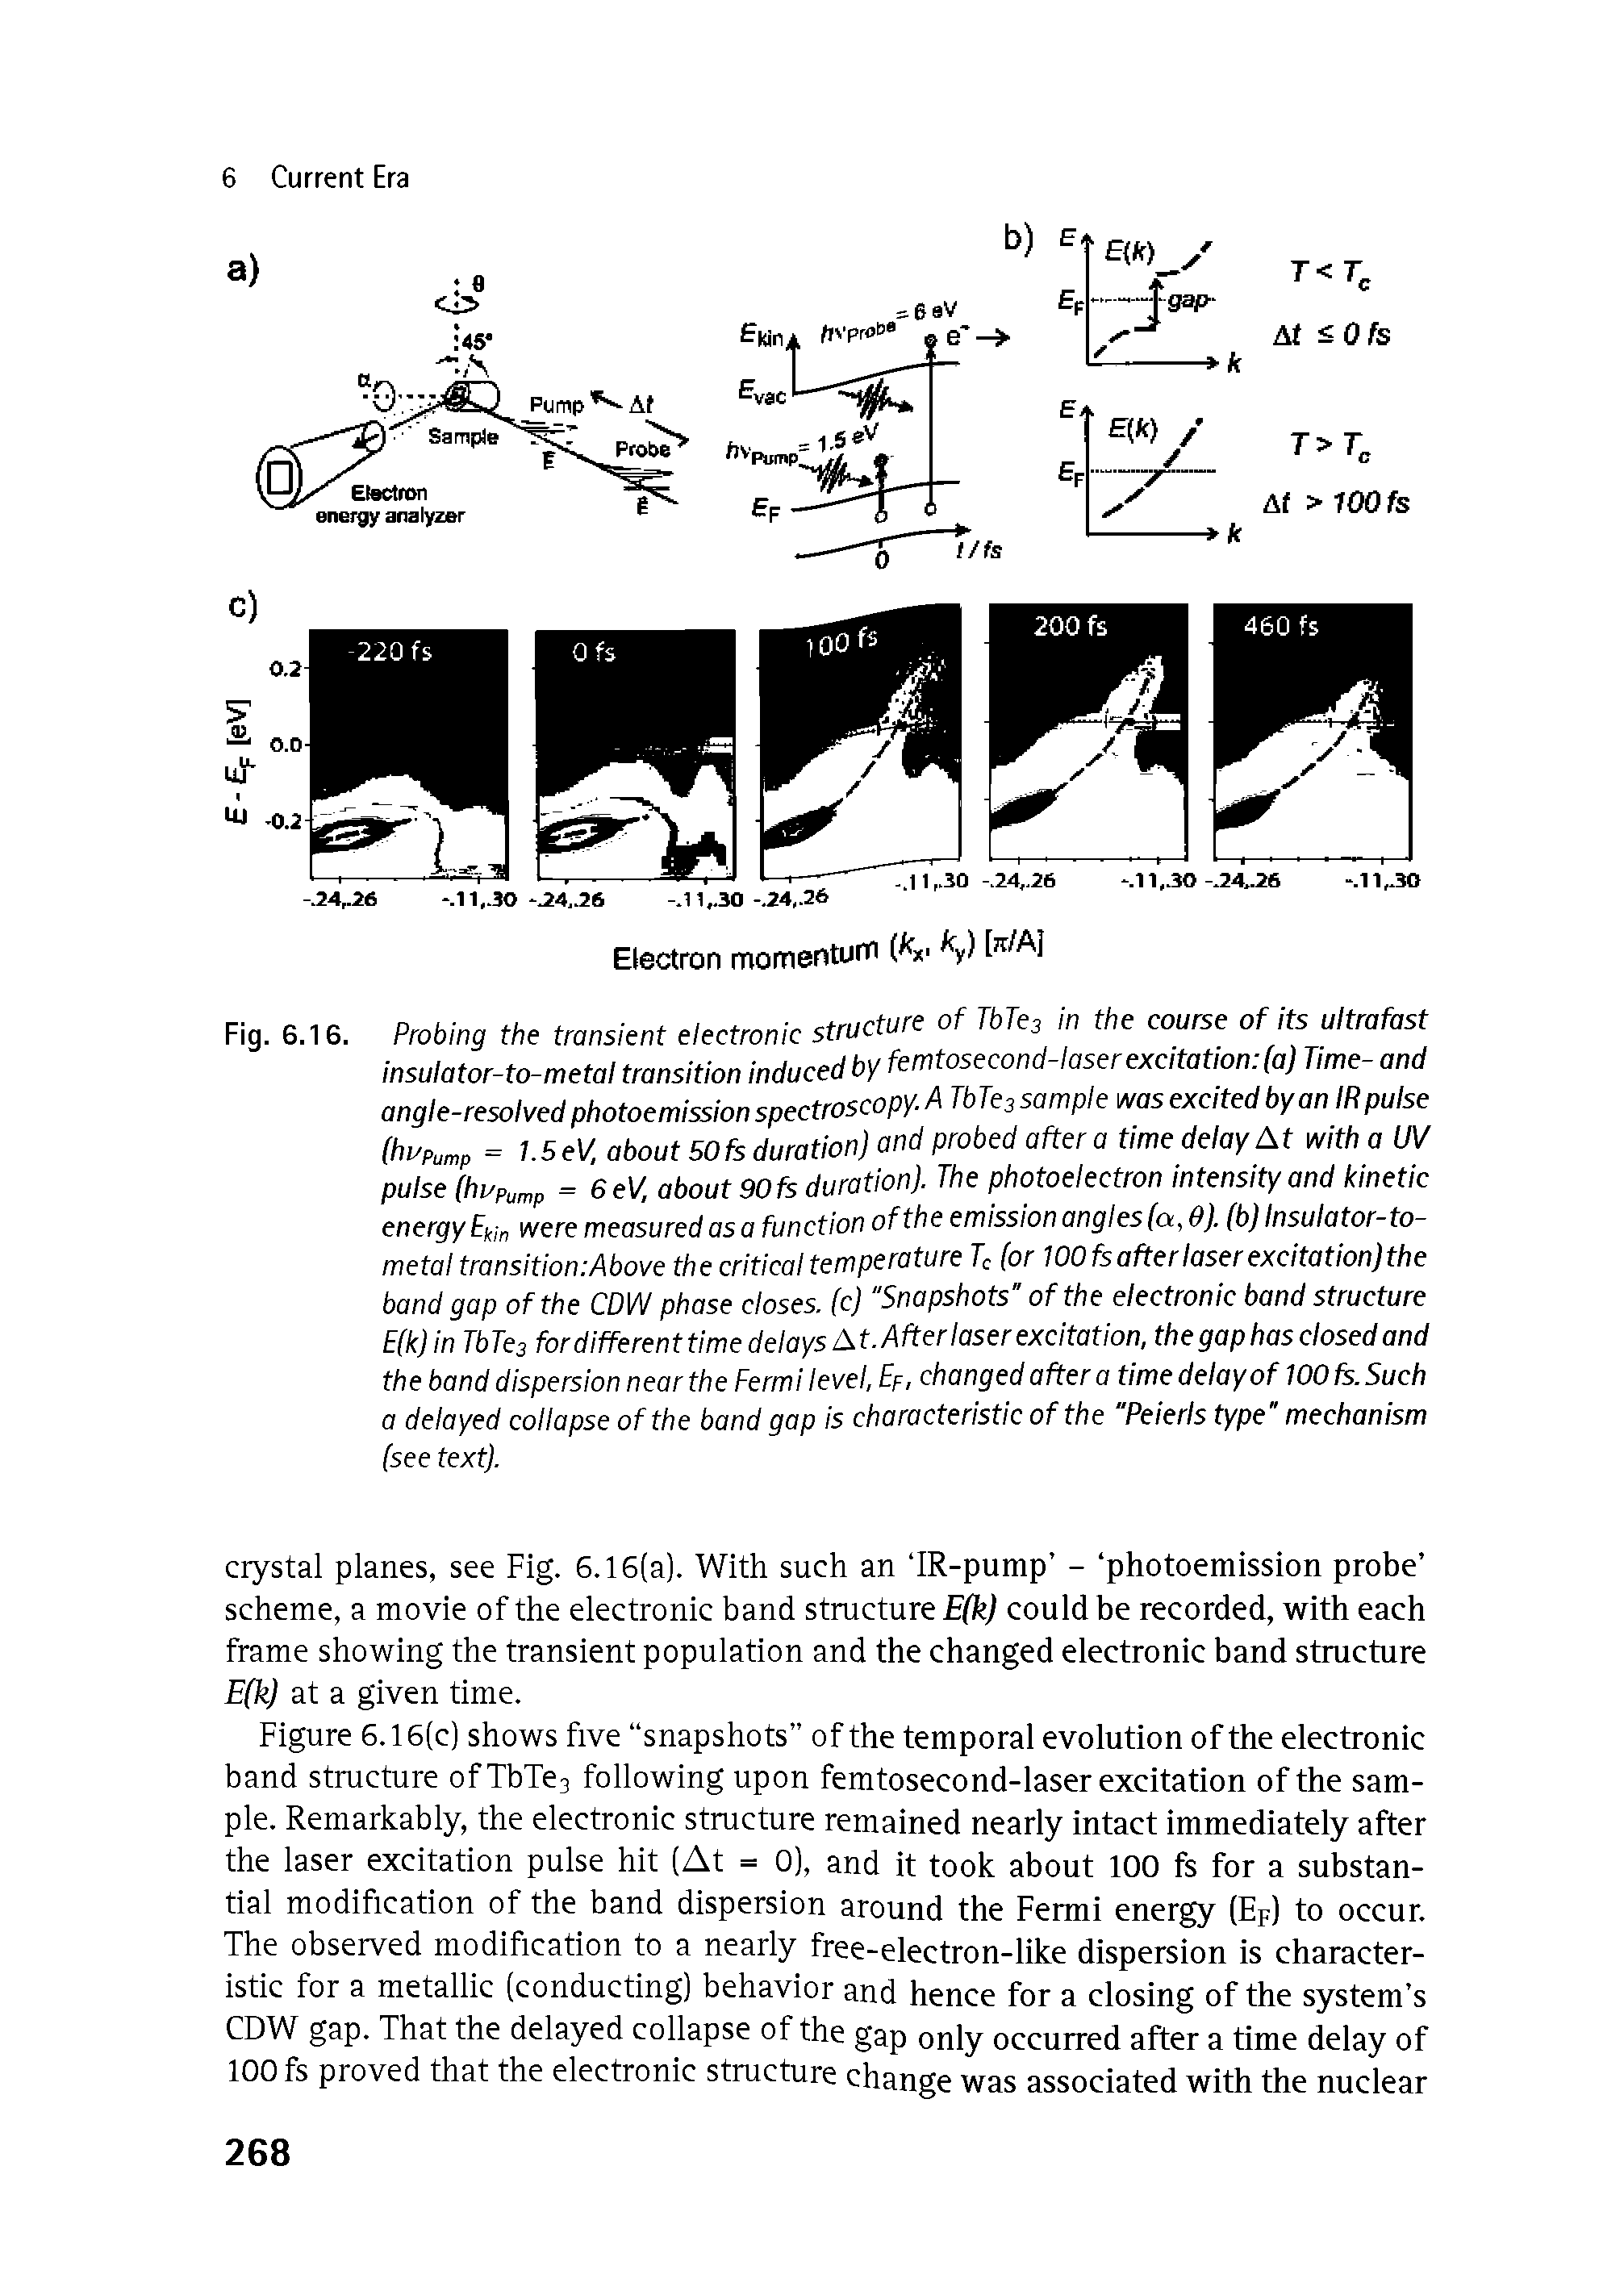 Fig. 6.16. Probing the transient electronic structure of TbTes in the course of its ultrafast insulator-to-metal transition induced by femtosecond-laser excitation (a) Time- and angle-resolved photoemission spectroscopy. A TbTcs sample was excited by an IR pulse (hi Pump = I.SeV, about 50 fs duration) and probed after a time delay At with a UV pulse (hi/pump = 6 eV, about 90 fs duration). The photoelectron intensity and kinetic energy E ,i were measured as a function of the emission angles (a, 9). (b) Insulator-to-metal transition Above the critical temperature Tc (or 100fsafterlaserexcitation)the band gap of the CDW phase closes, (c) "Snapshots" of the electronic band structure E(k)in TbTej fordifferenttimedelaysAt.Afterlaserexcitation, the gap has closed and the band dispersion near the Eermi level, Ep, changed after a time delay of 100 fs. Such a delayed collapse of the band gap is characteristic of the "Peierls type" mechanism (see text).